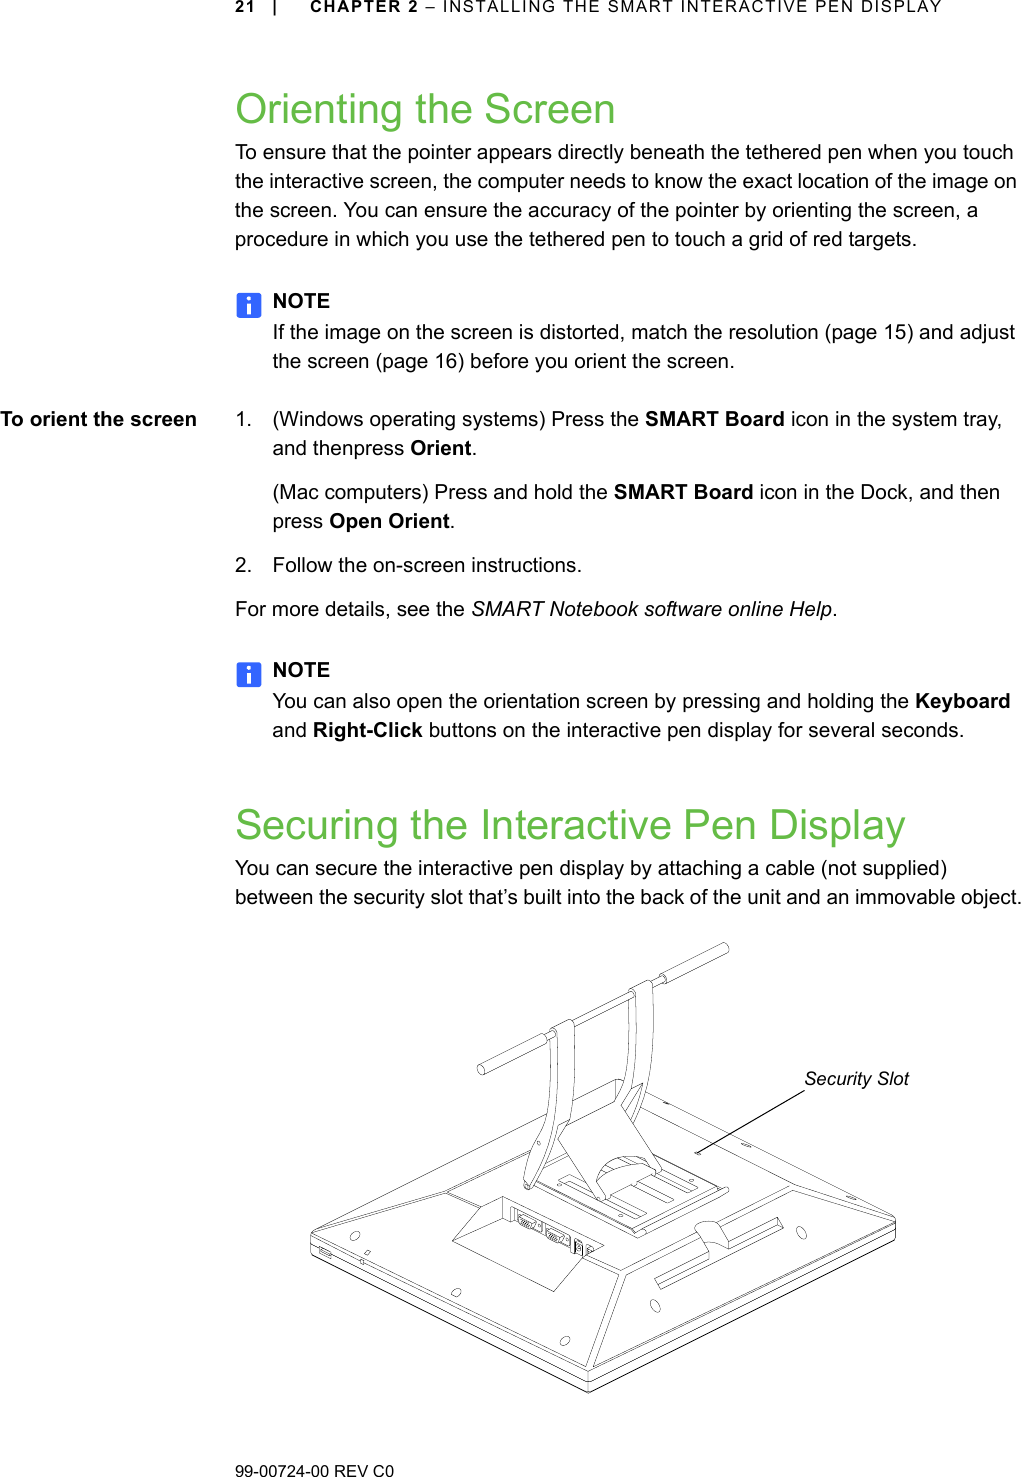 99-00724-00 REV C021 | CHAPTER 2 – INSTALLING THE SMART INTERACTIVE PEN DISPLAYOrienting the ScreenTo ensure that the pointer appears directly beneath the tethered pen when you touch the interactive screen, the computer needs to know the exact location of the image on the screen. You can ensure the accuracy of the pointer by orienting the screen, a procedure in which you use the tethered pen to touch a grid of red targets.NOTEIf the image on the screen is distorted, match the resolution (page 15) and adjust the screen (page 16) before you orient the screen.To orient the screen 1. (Windows operating systems) Press the SMART Board icon in the system tray, and thenpress Orient.(Mac computers) Press and hold the SMART Board icon in the Dock, and then press Open Orient. 2. Follow the on-screen instructions.For more details, see the SMART Notebook software online Help.NOTEYou can also open the orientation screen by pressing and holding the Keyboard and Right-Click buttons on the interactive pen display for several seconds.Securing the Interactive Pen DisplayYou can secure the interactive pen display by attaching a cable (not supplied) between the security slot that’s built into the back of the unit and an immovable object.Security Slot